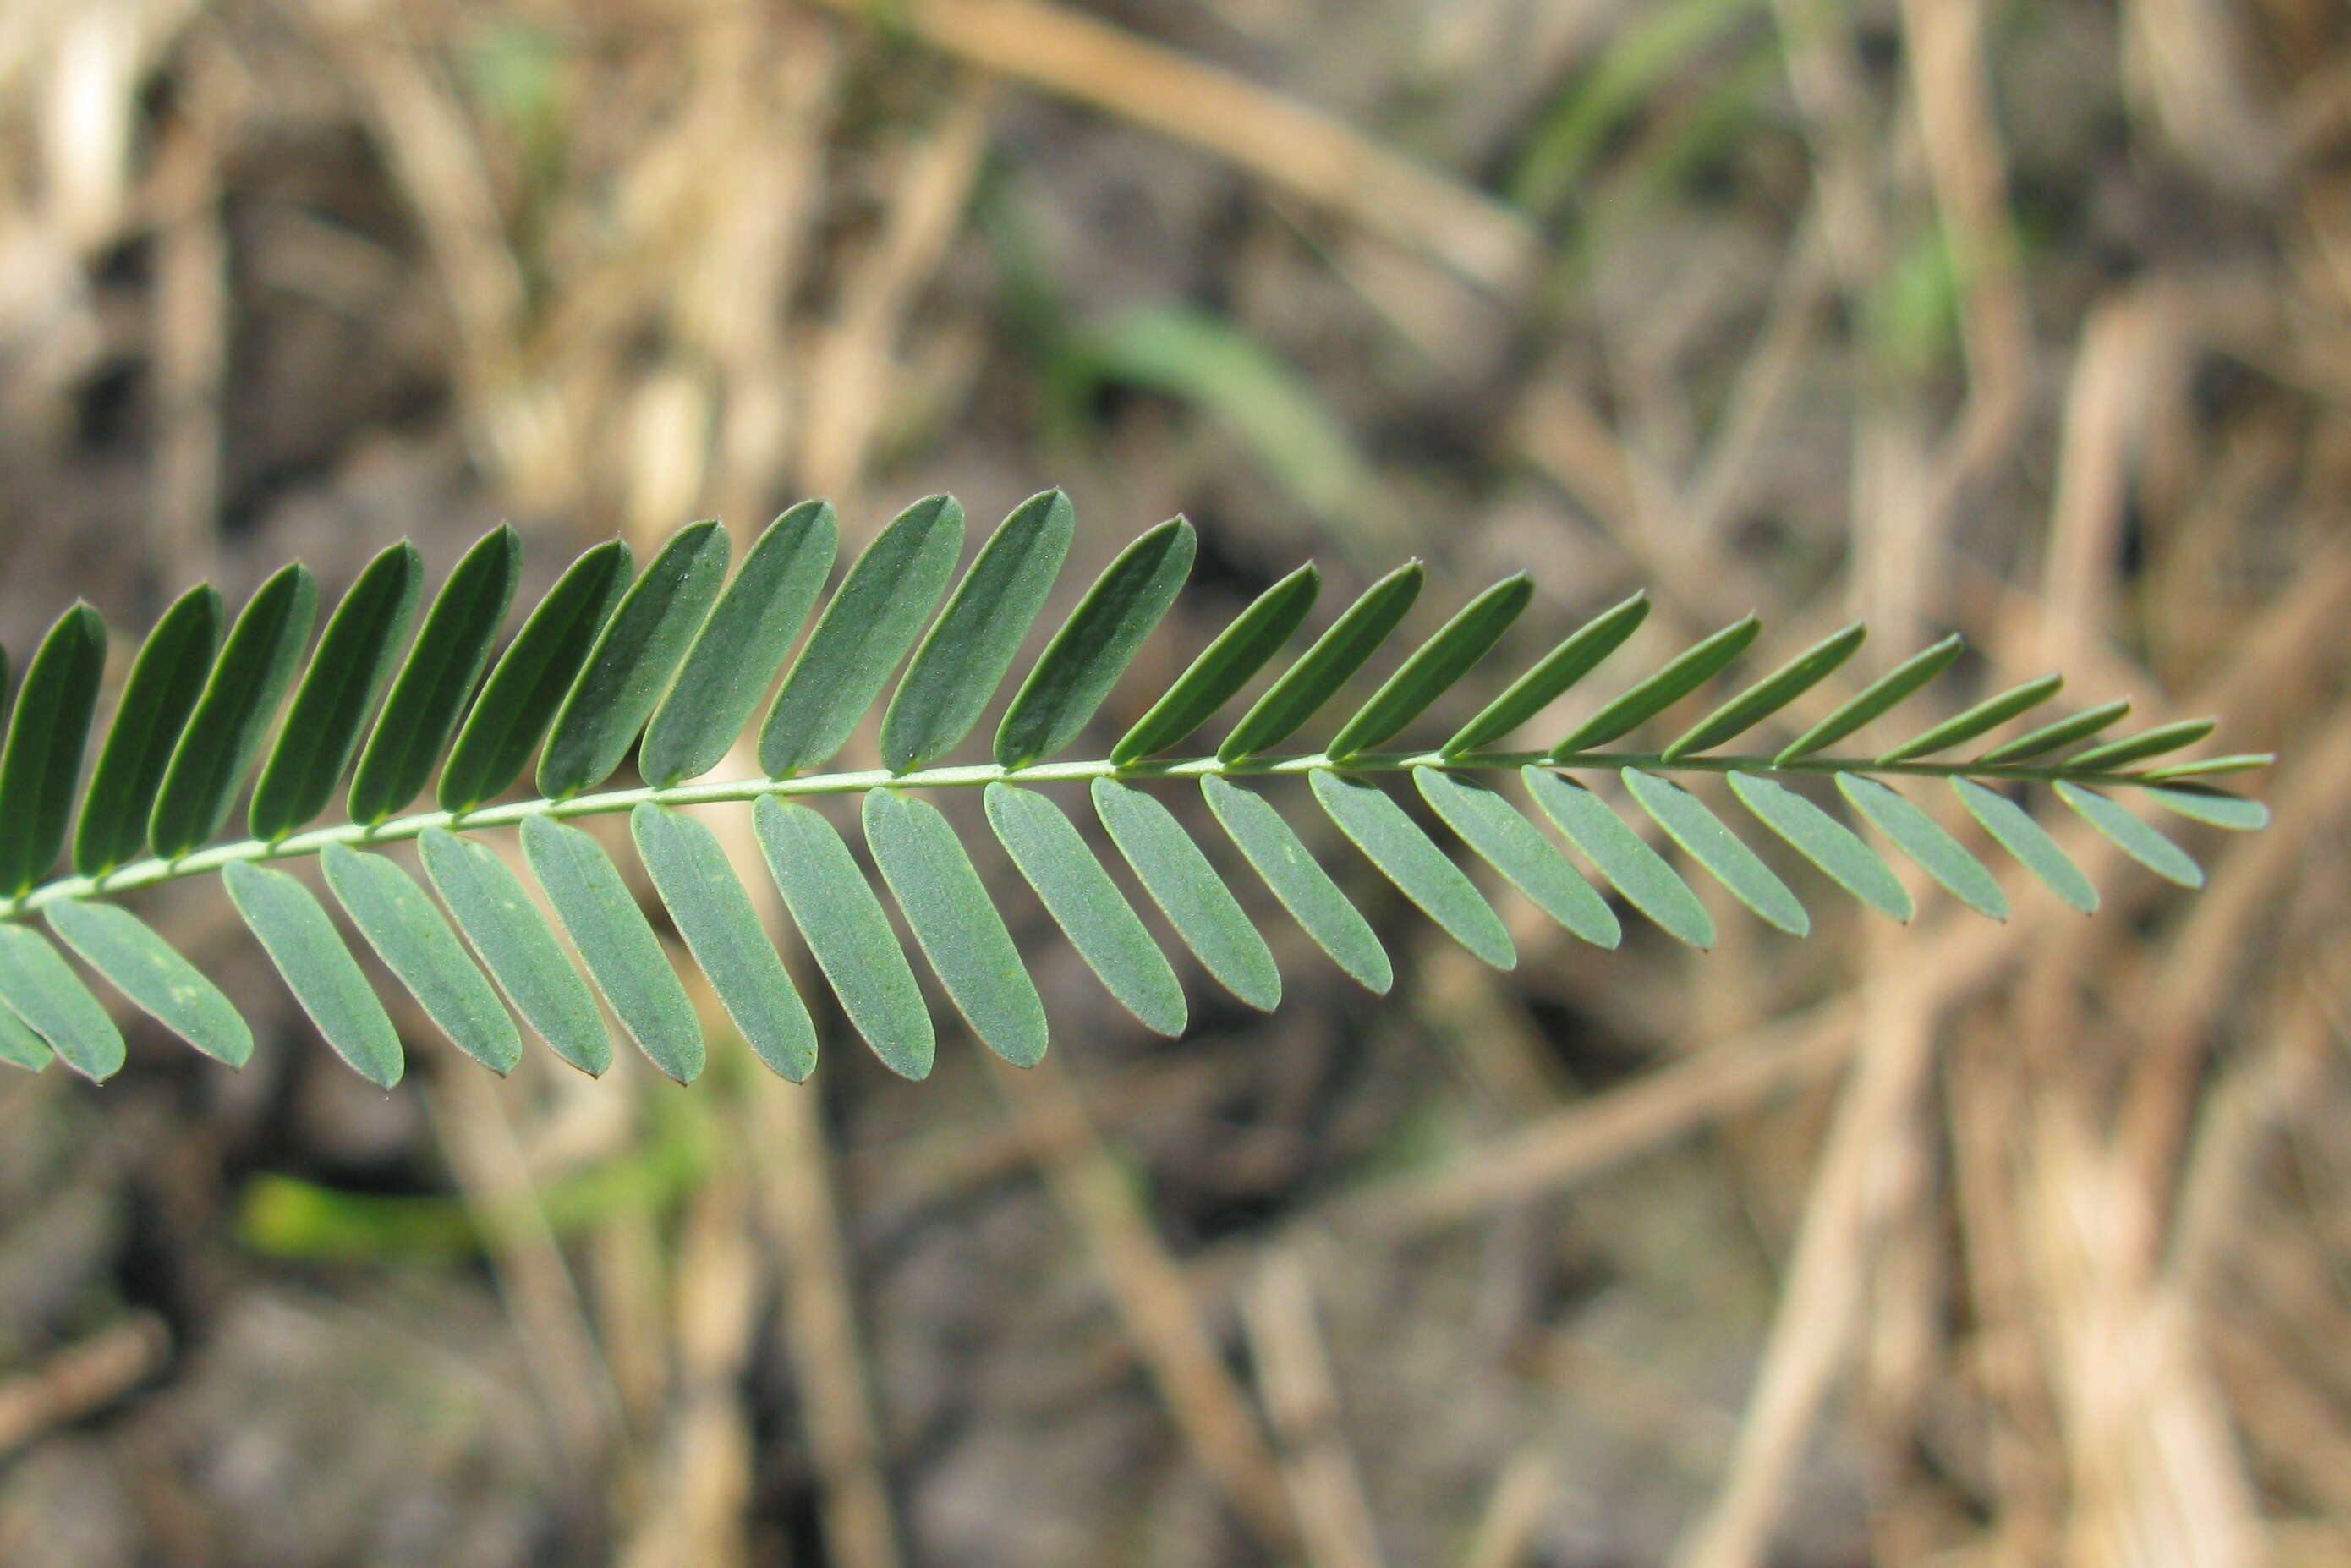 Image of Indian jointvetch